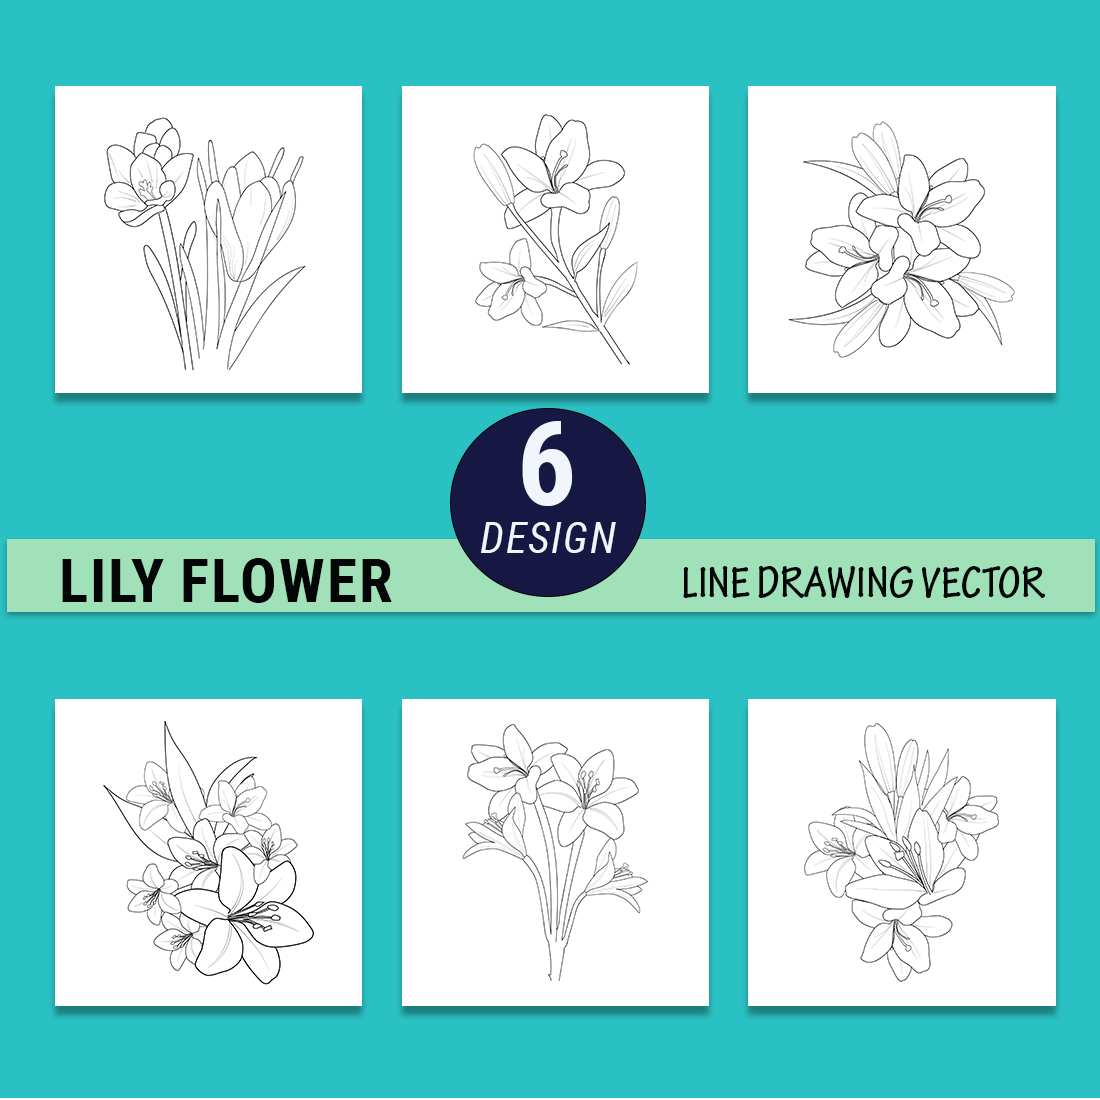 How to Draw a Flower: 10 Easy Guides for Kids & Beginners